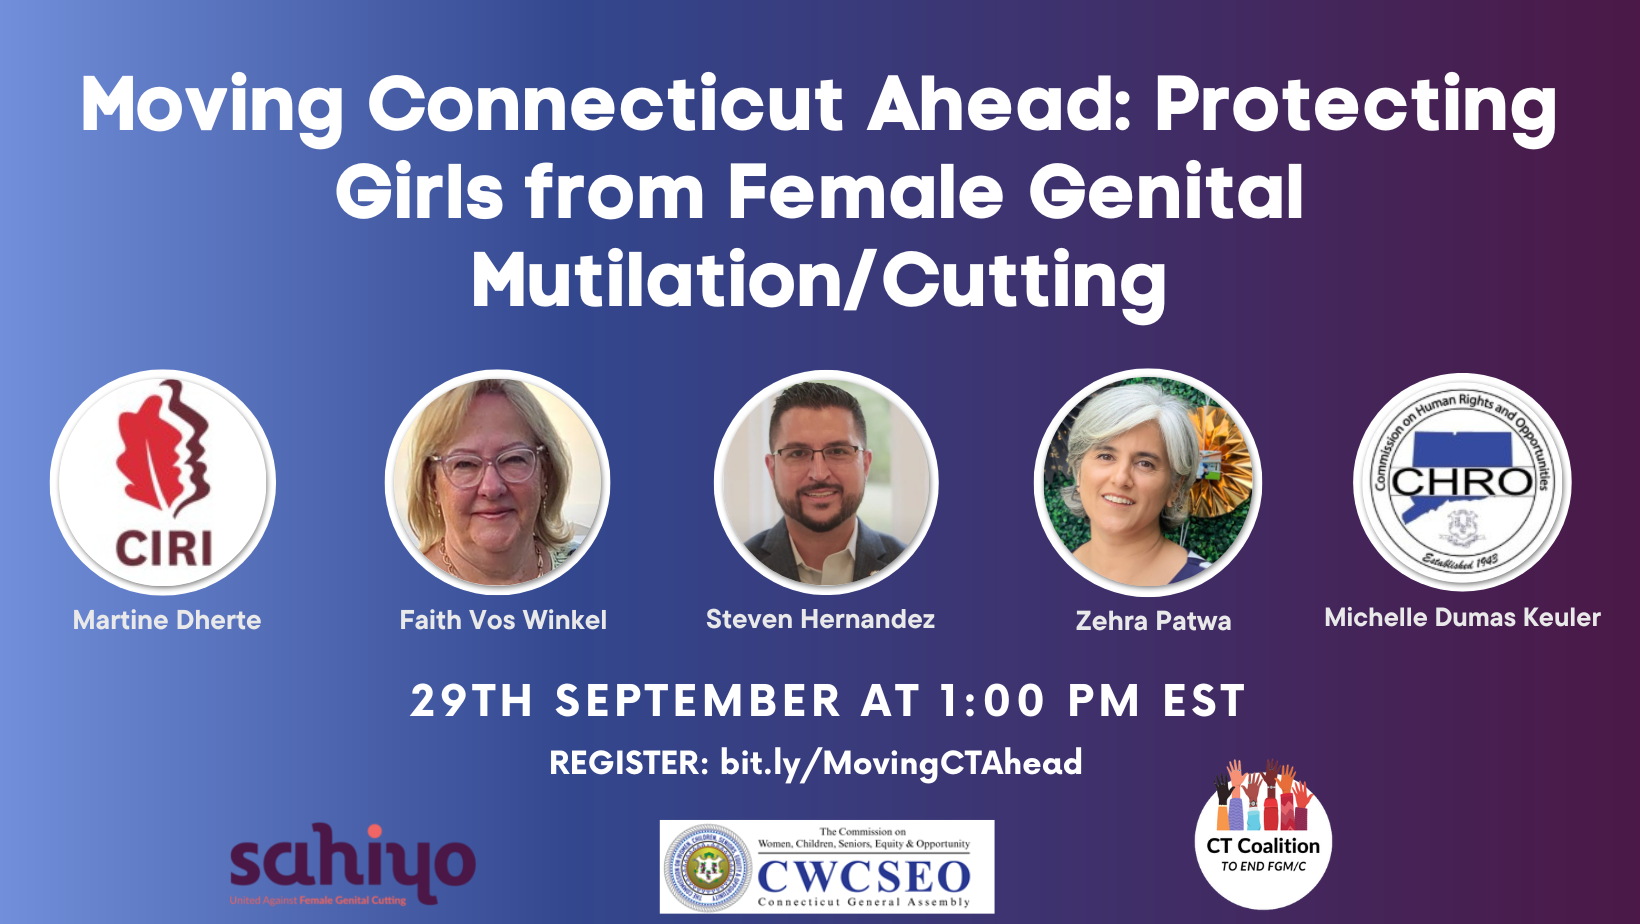 Moving Connecticut ahead: Protecting girls from Female Genital Mutilation/Cutting 